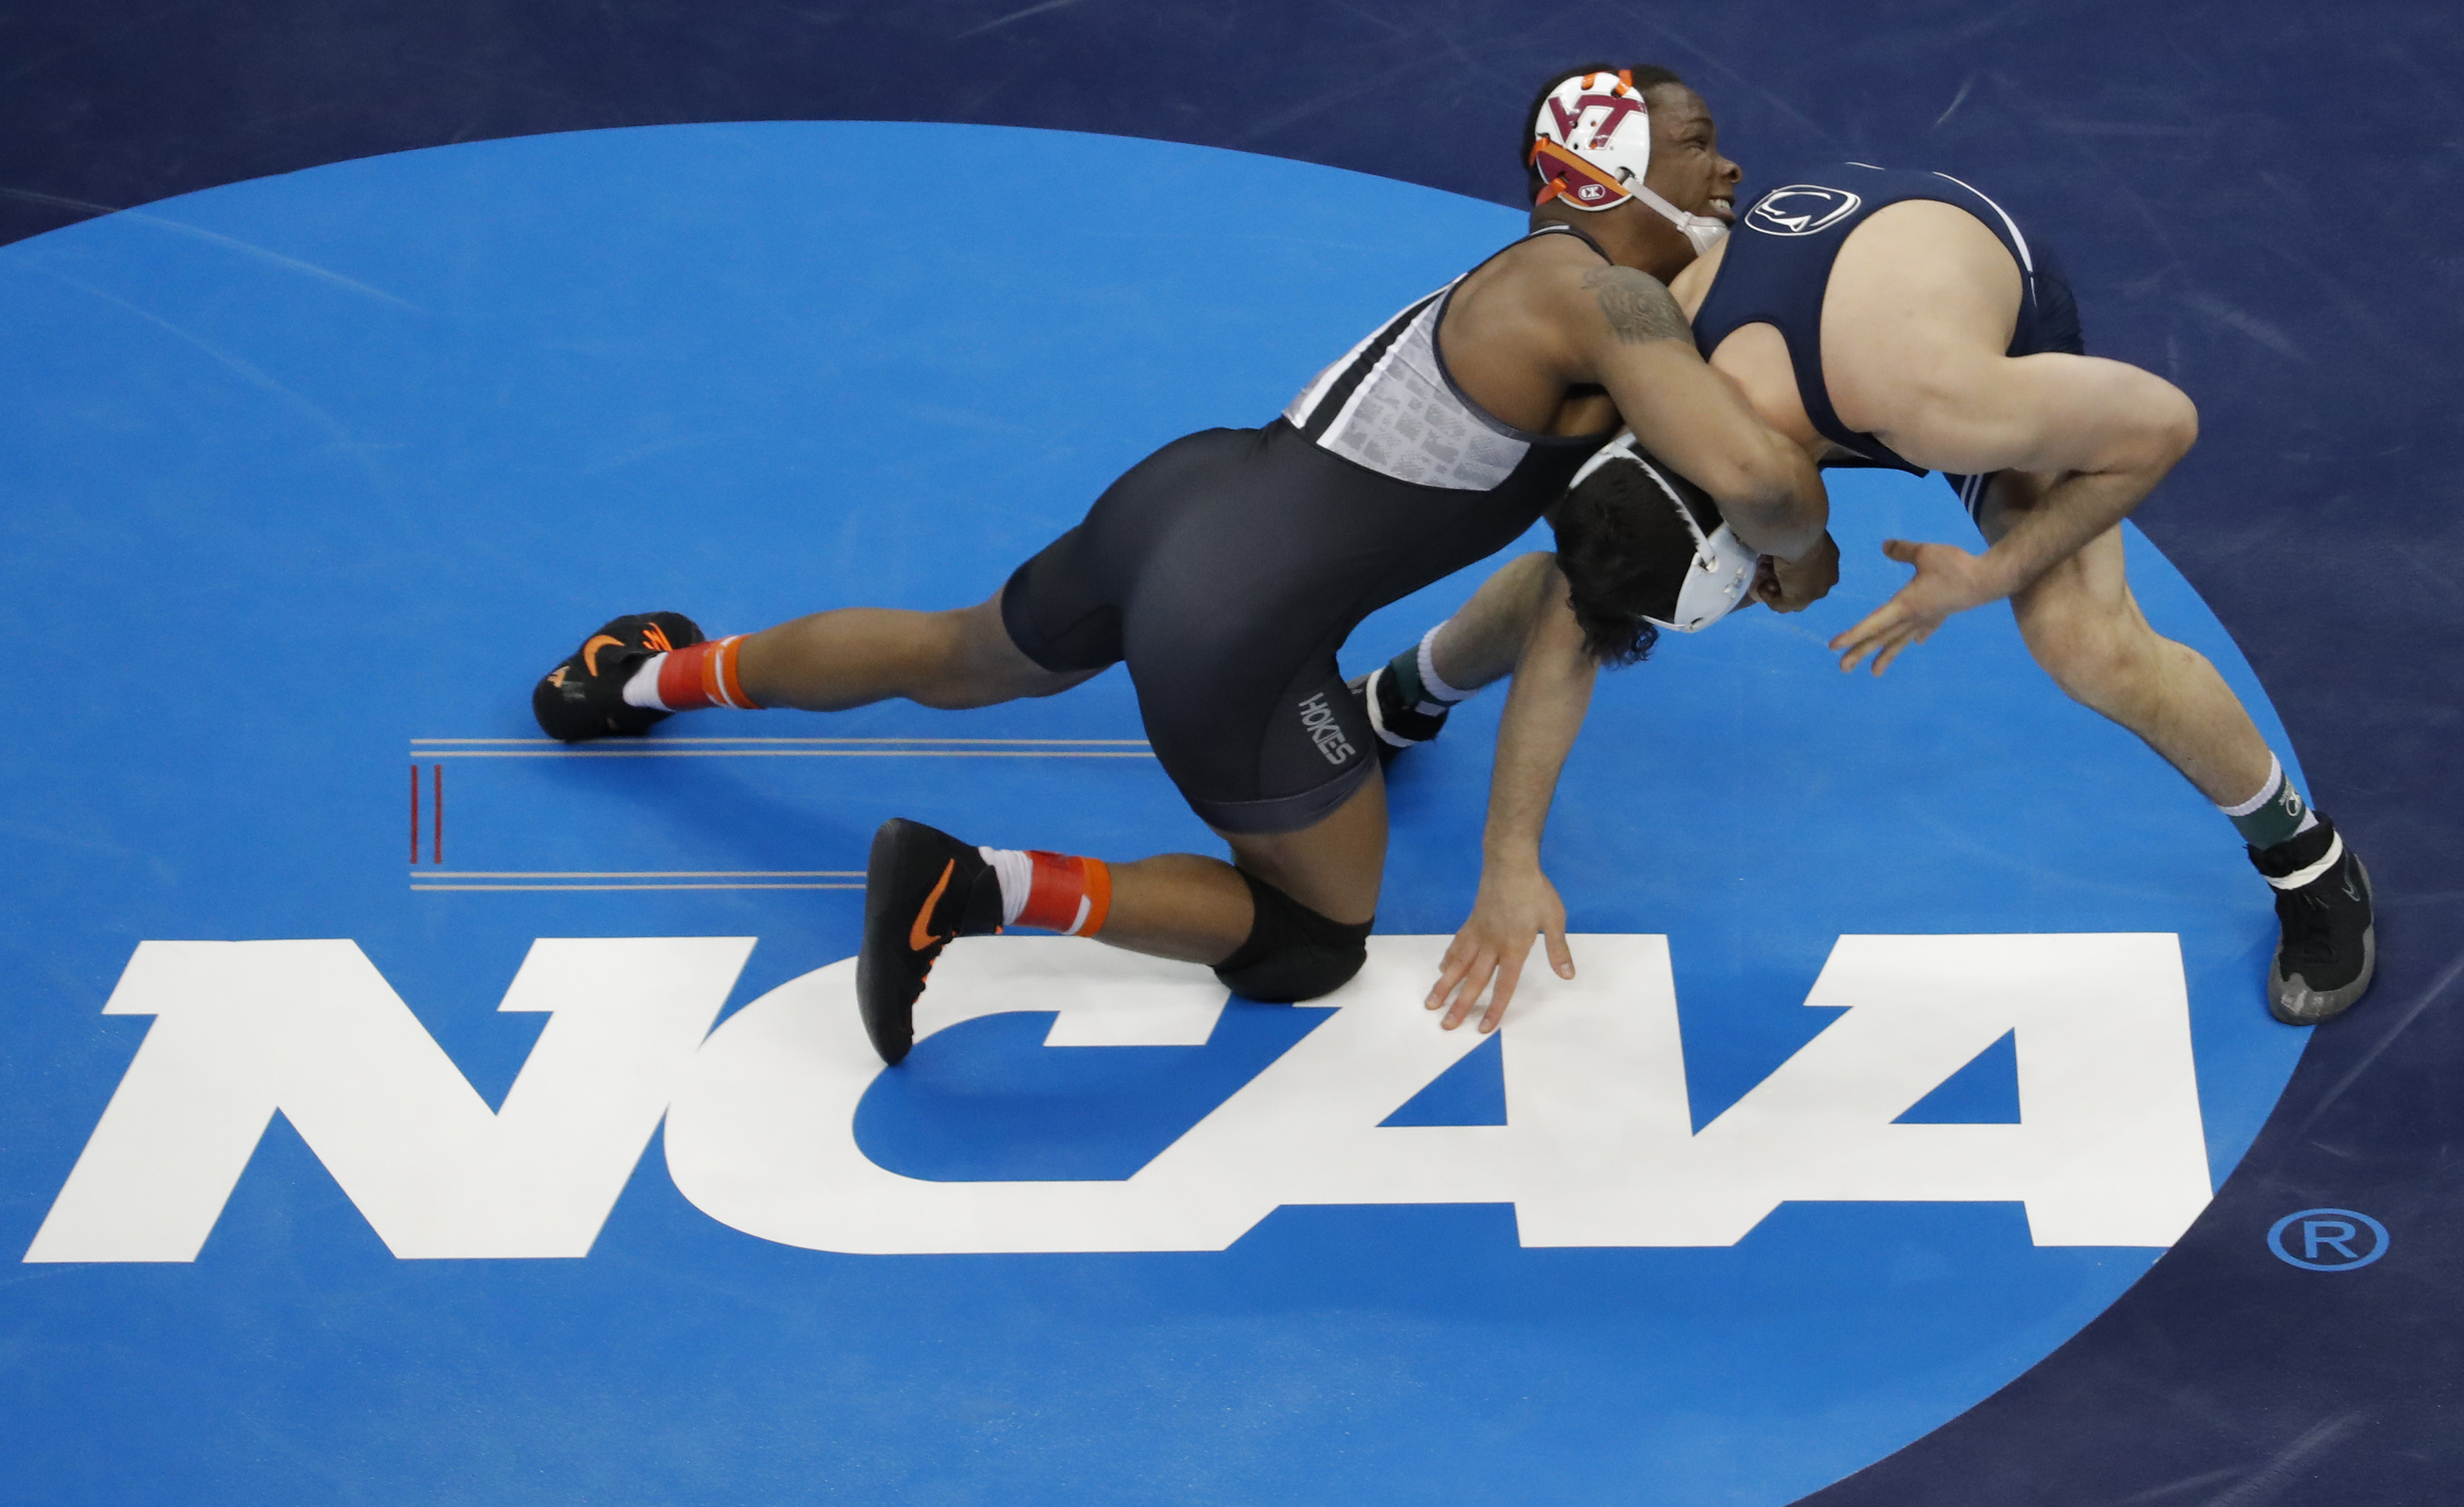 Ncaa Wrestling Schedule 2022 How To Watch College Wrestling: Unc Vs. Virginia Time, Tv Channel, Free  Live Stream (1/28/2022) - Syracuse.com